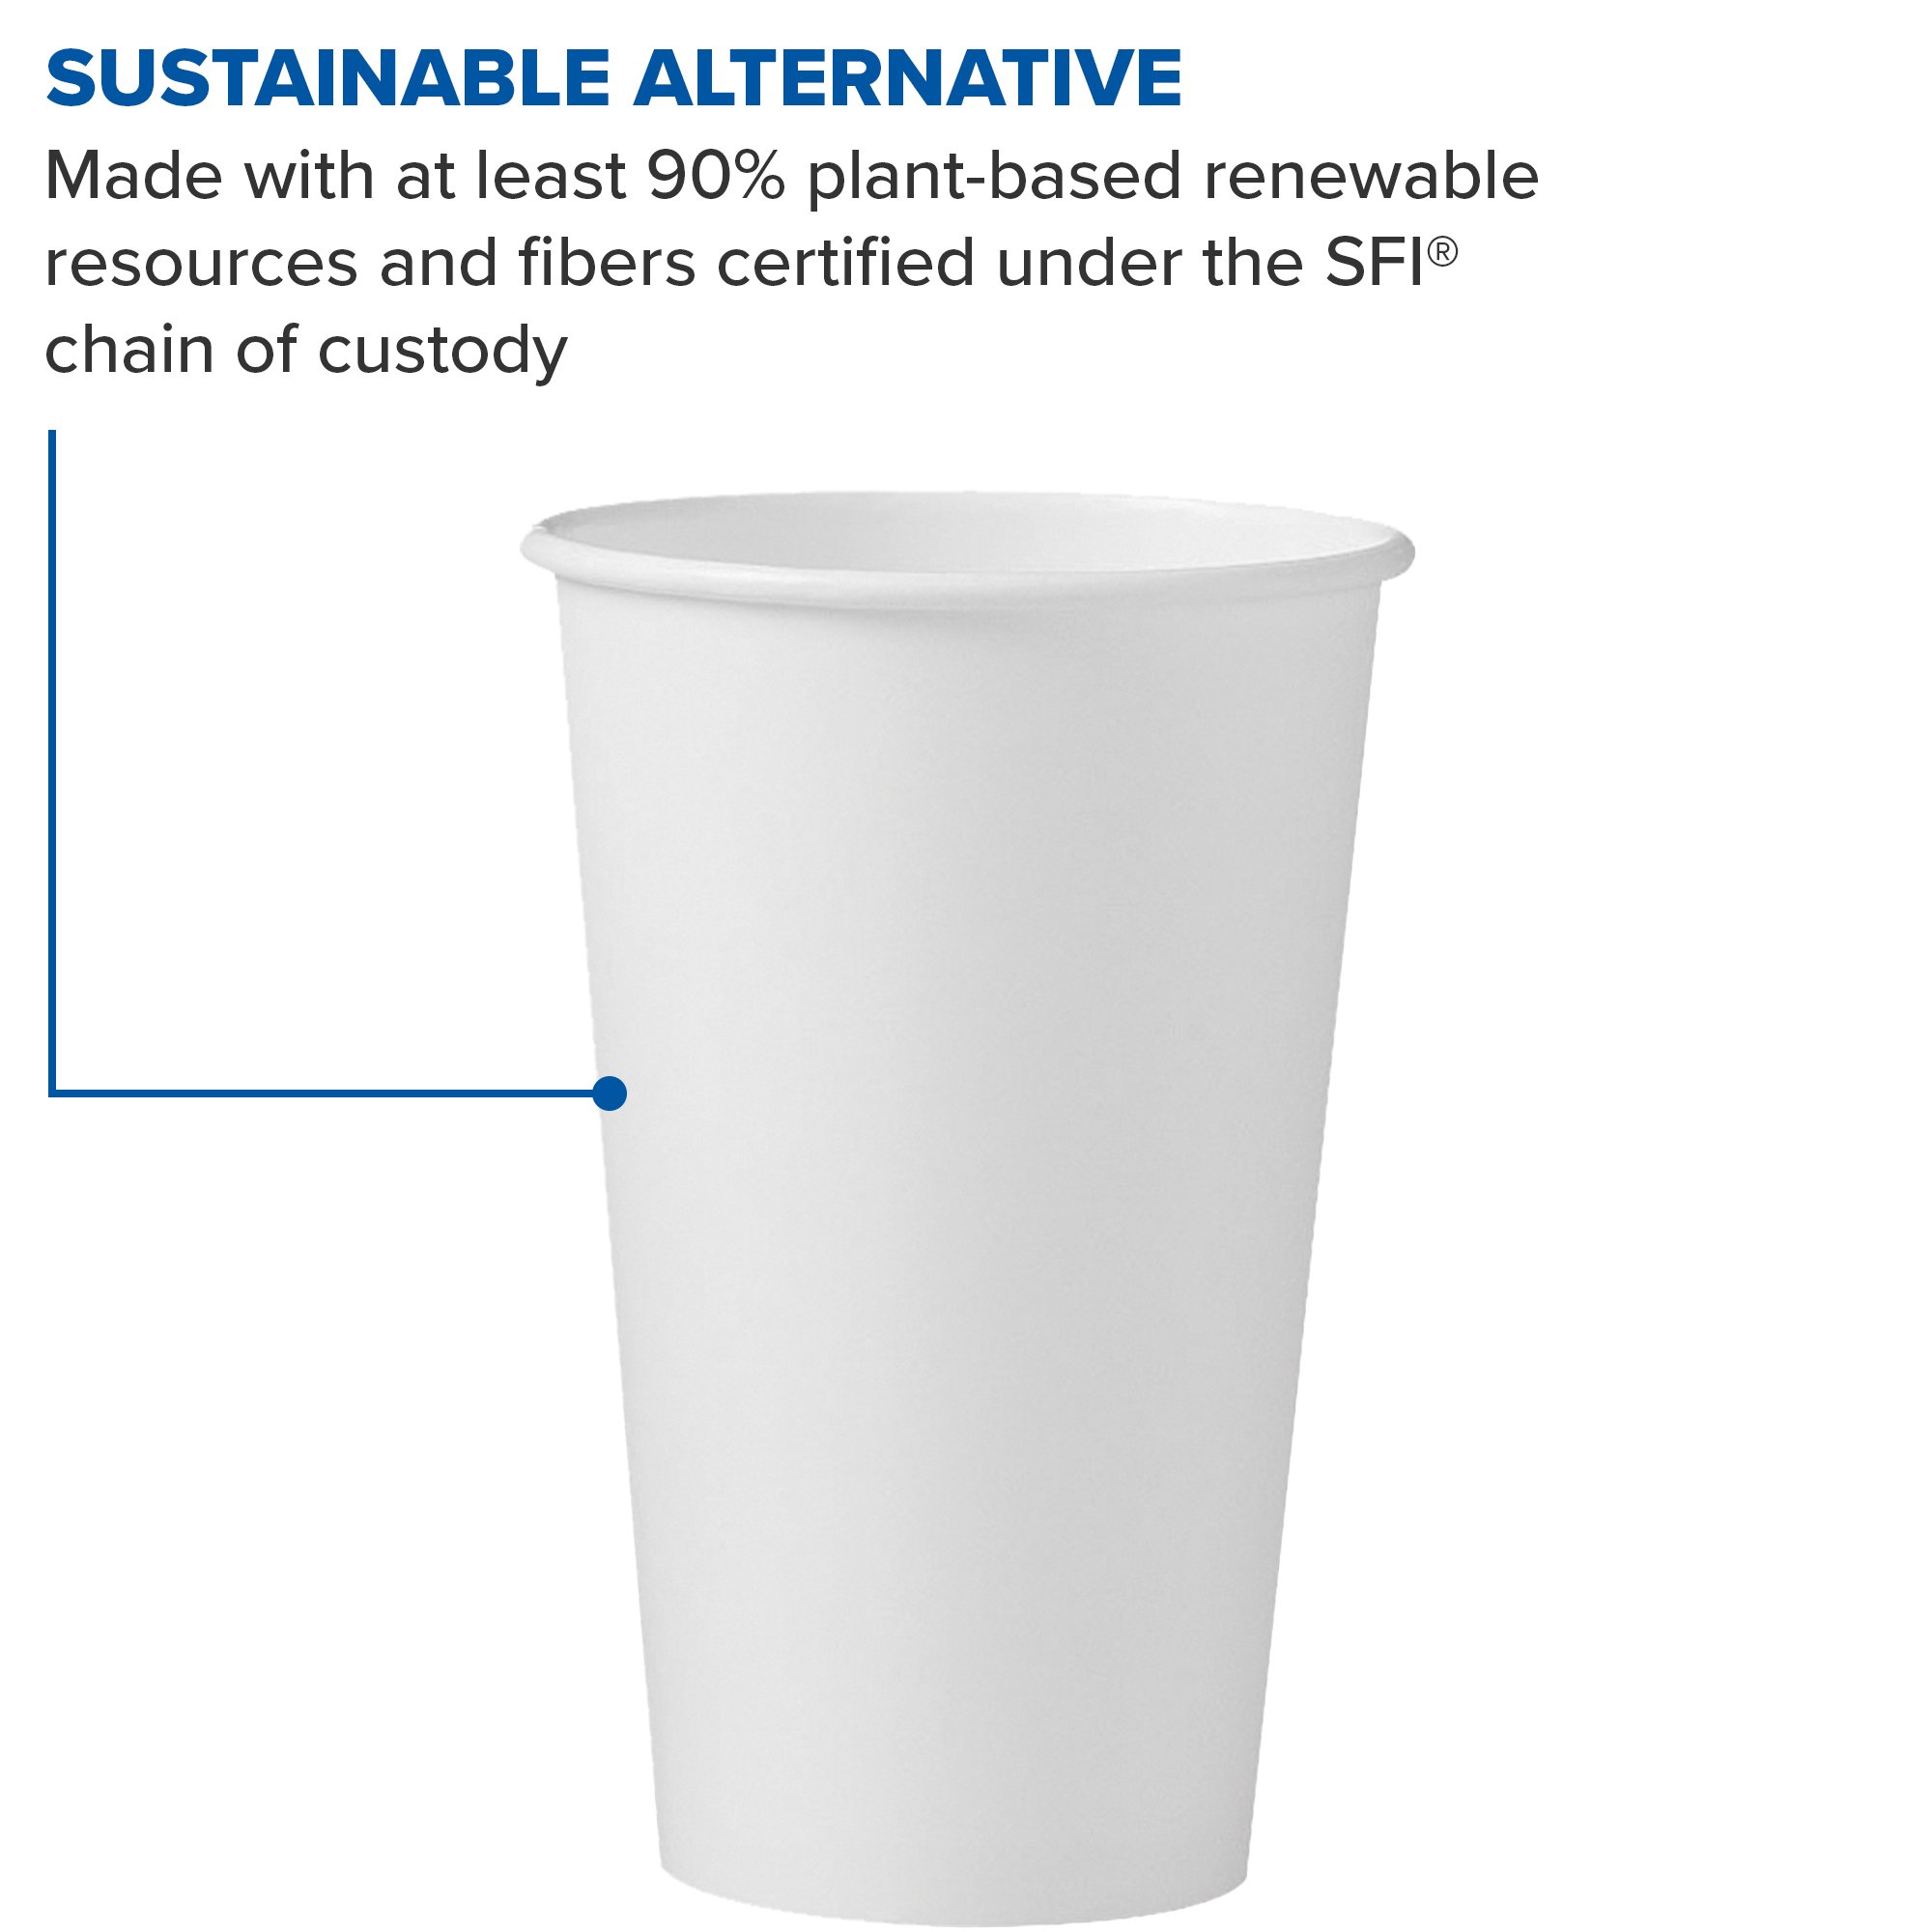 Solo Foodservice 316W 16 Oz. White Paper Hot Cup noHandle Singlepoly (1000-Pack)